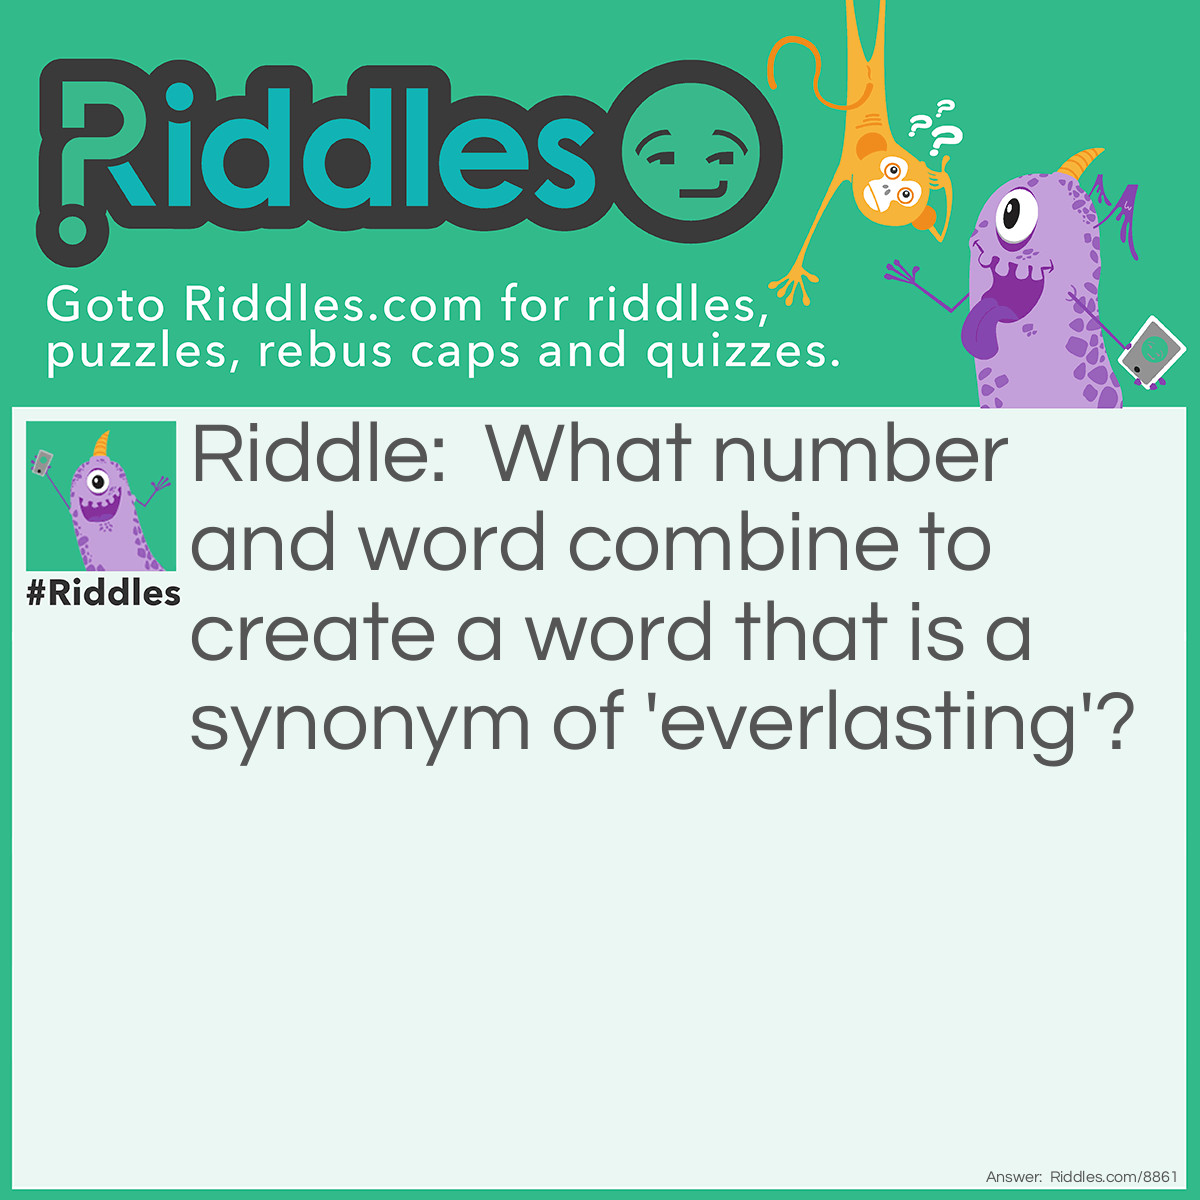 Riddle: What number and word combine to create a word that is a synonym of 'everlasting'? Answer: 4ever